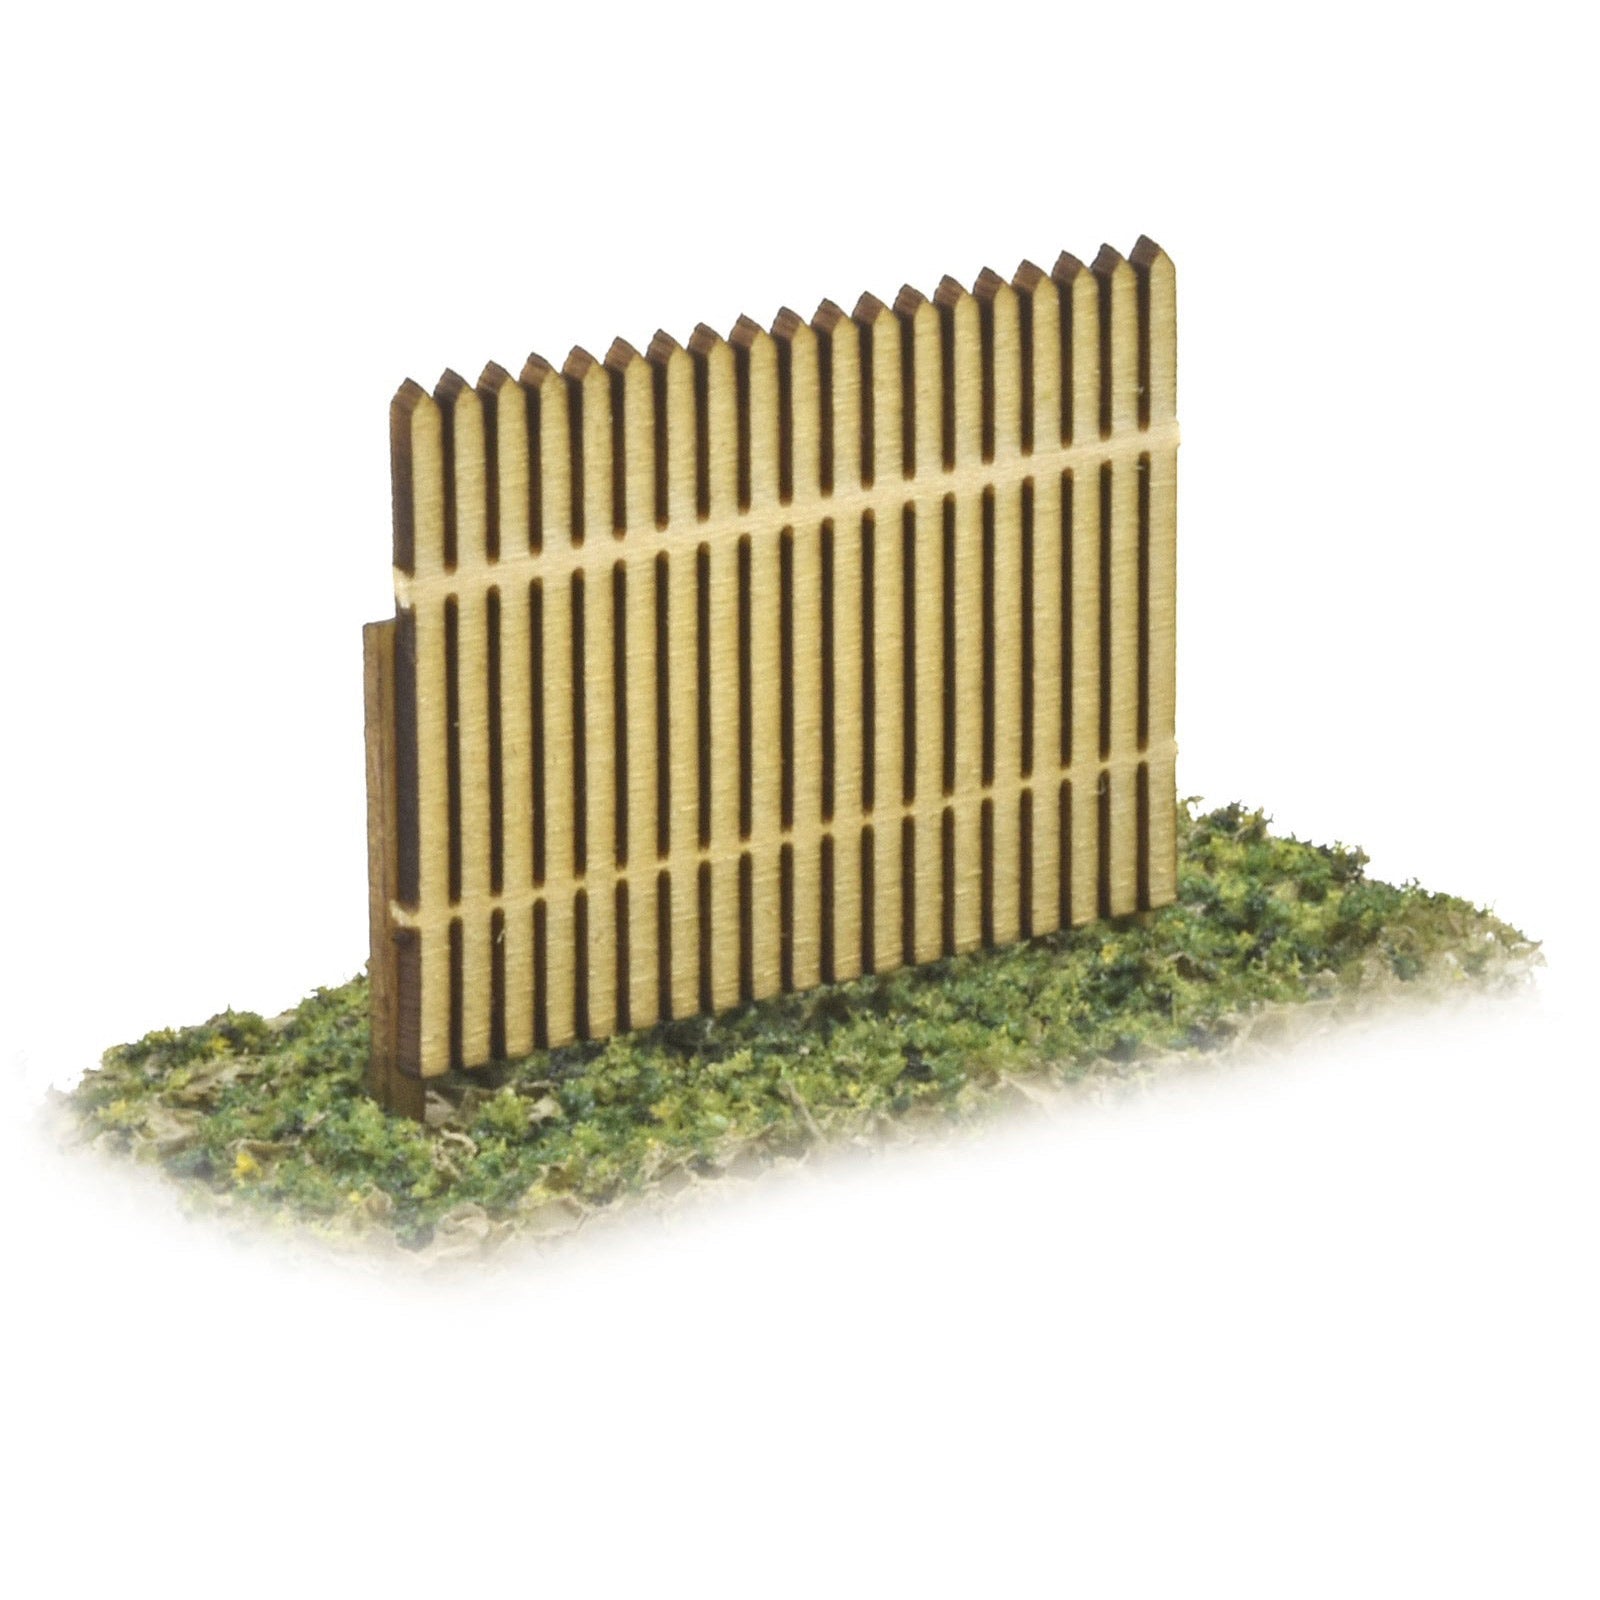 Picket Fence for Model Railroads, HO Scale, By Scientific